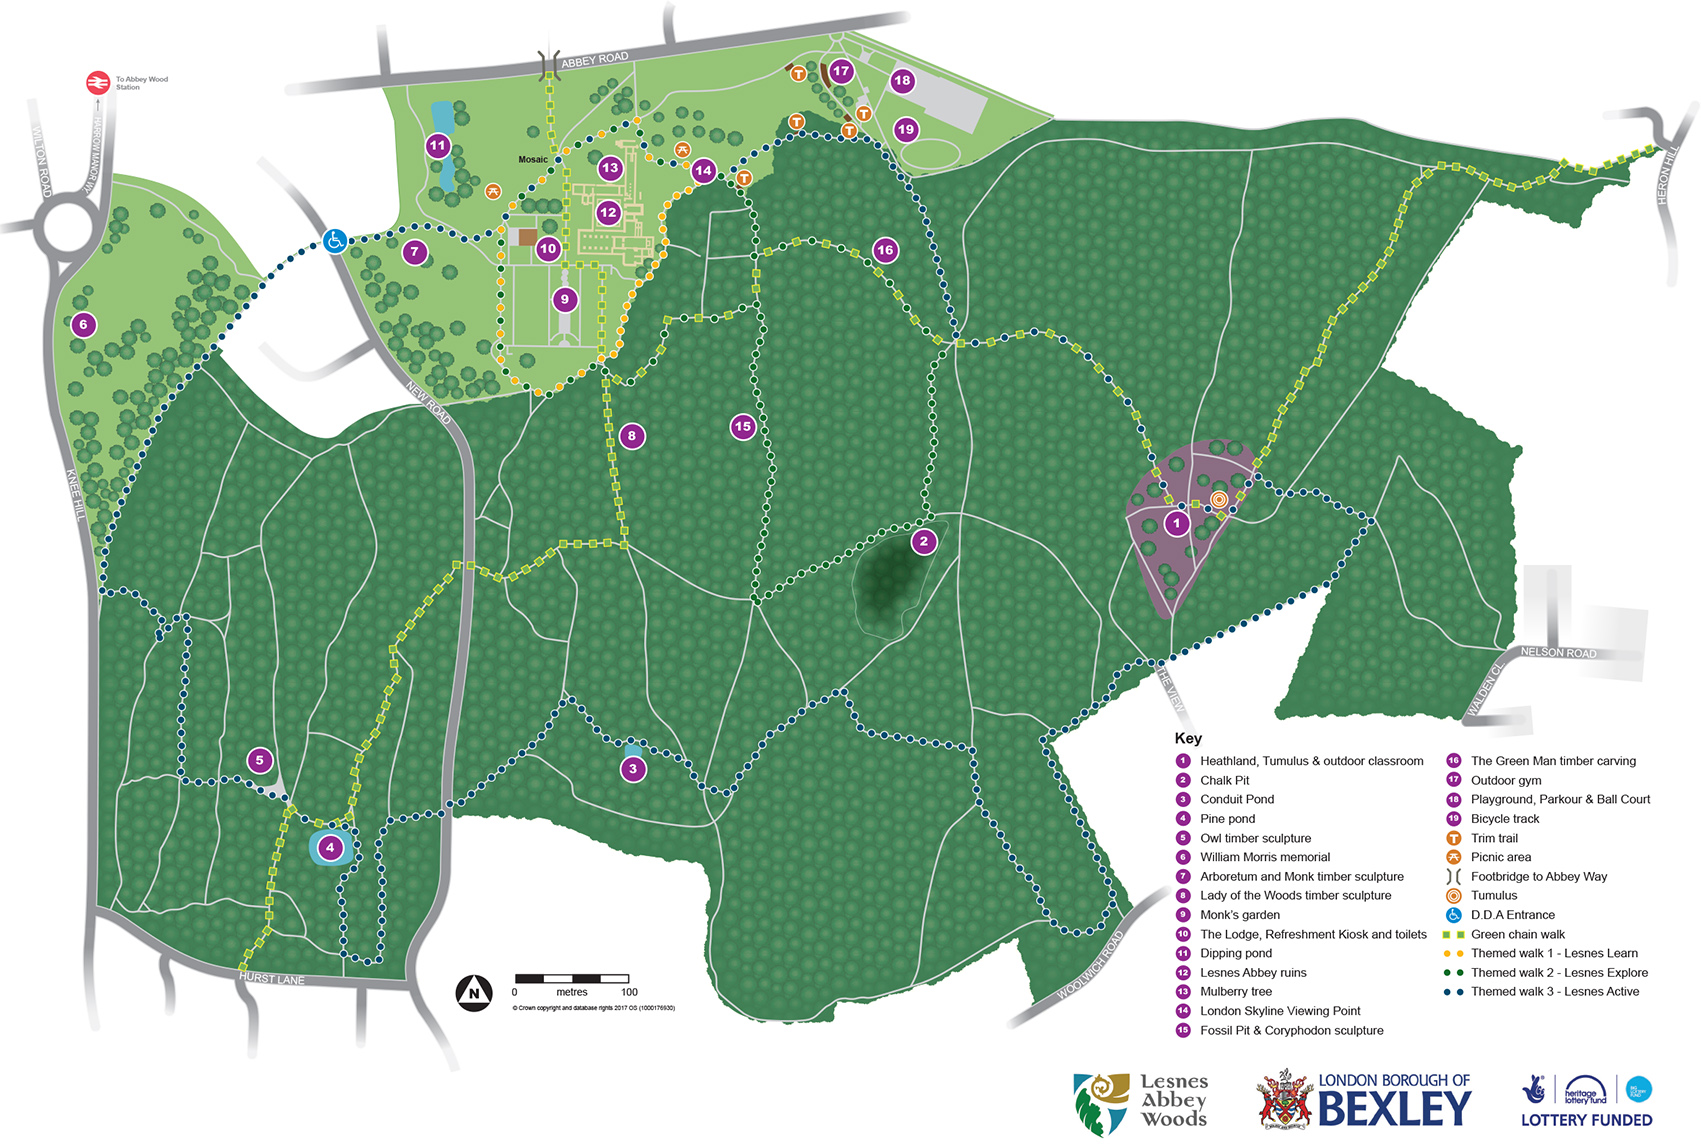 Lesnes Abbey Woods map